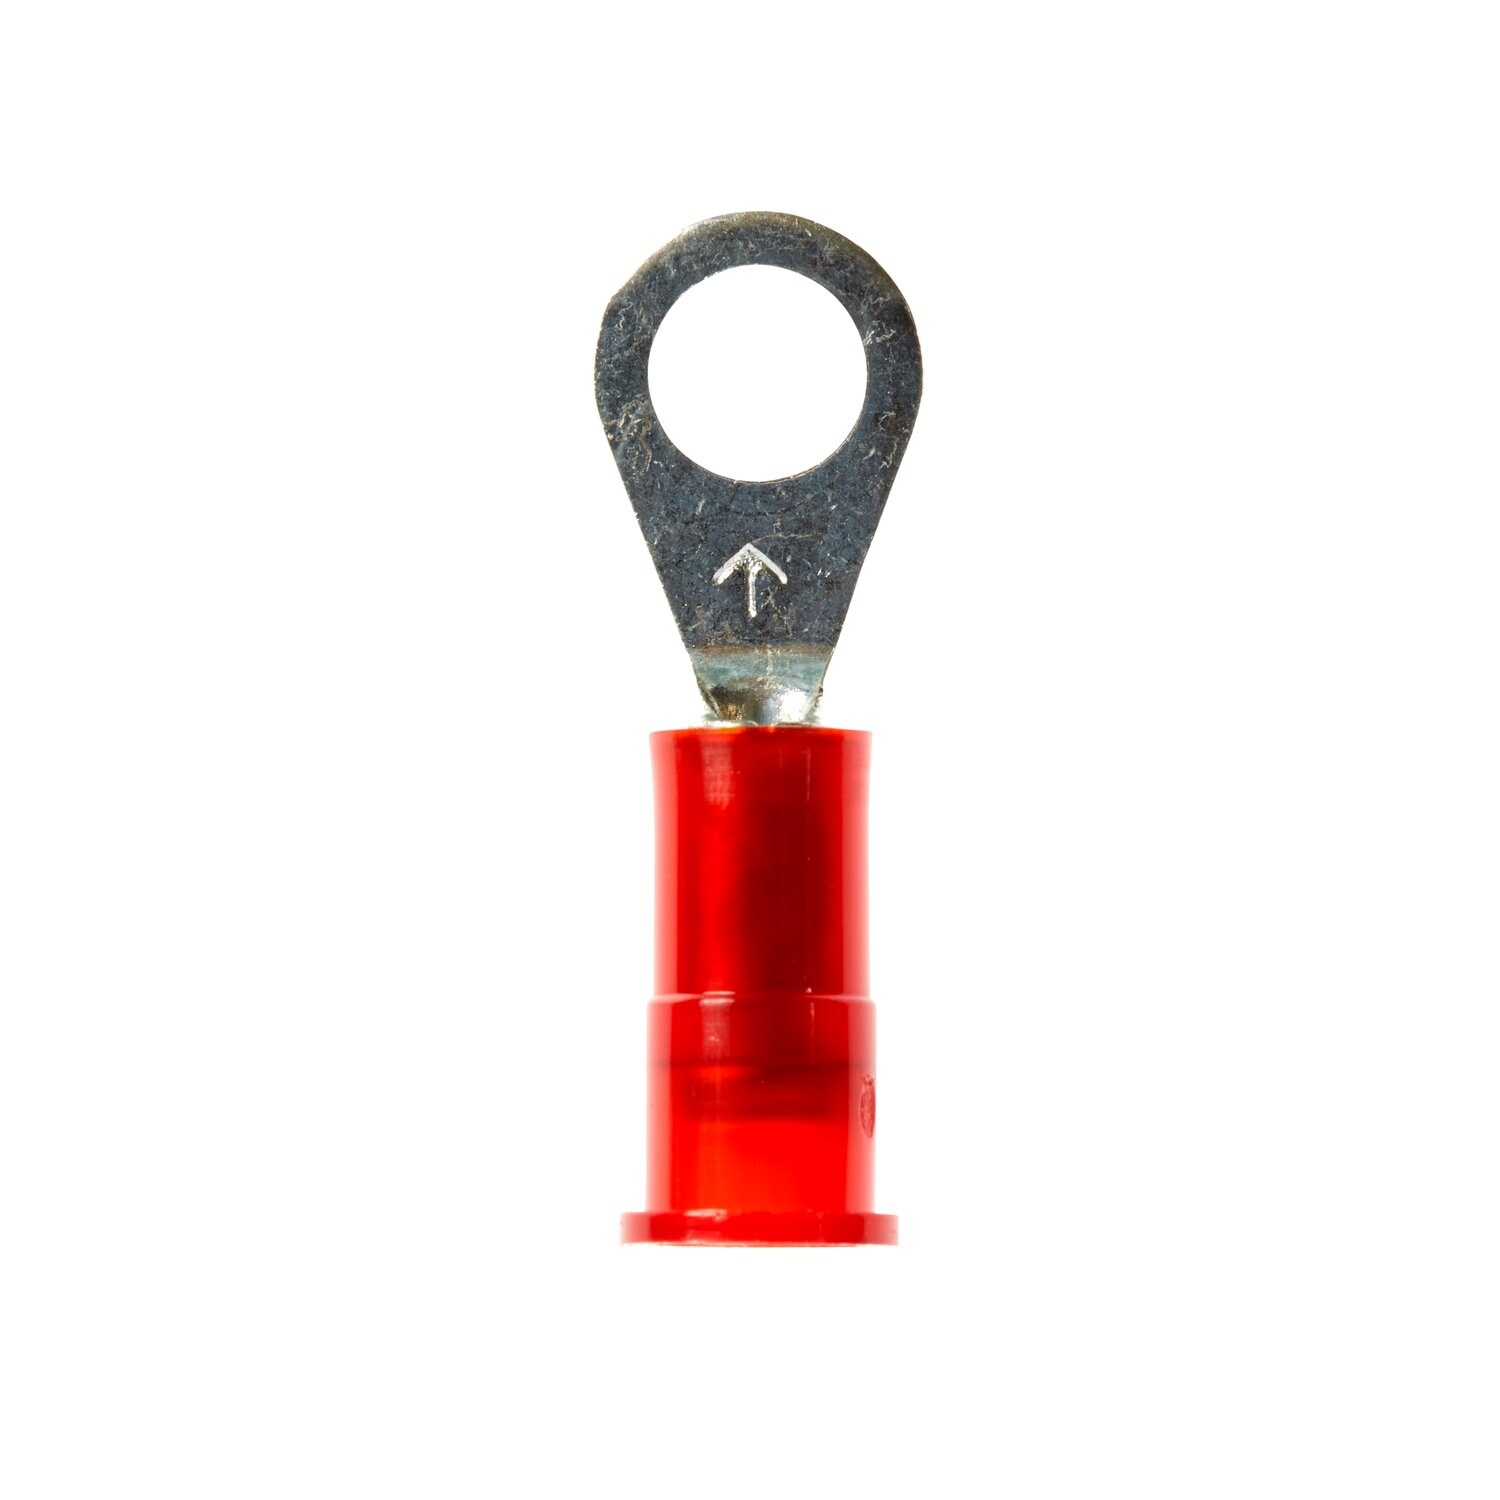 7000133272 - 3M Scotchlok Ring Nylon Insulated, 100/bottle, MNG18-10R/LX,
standard-style ring tongue fits around the stud, 500/Case